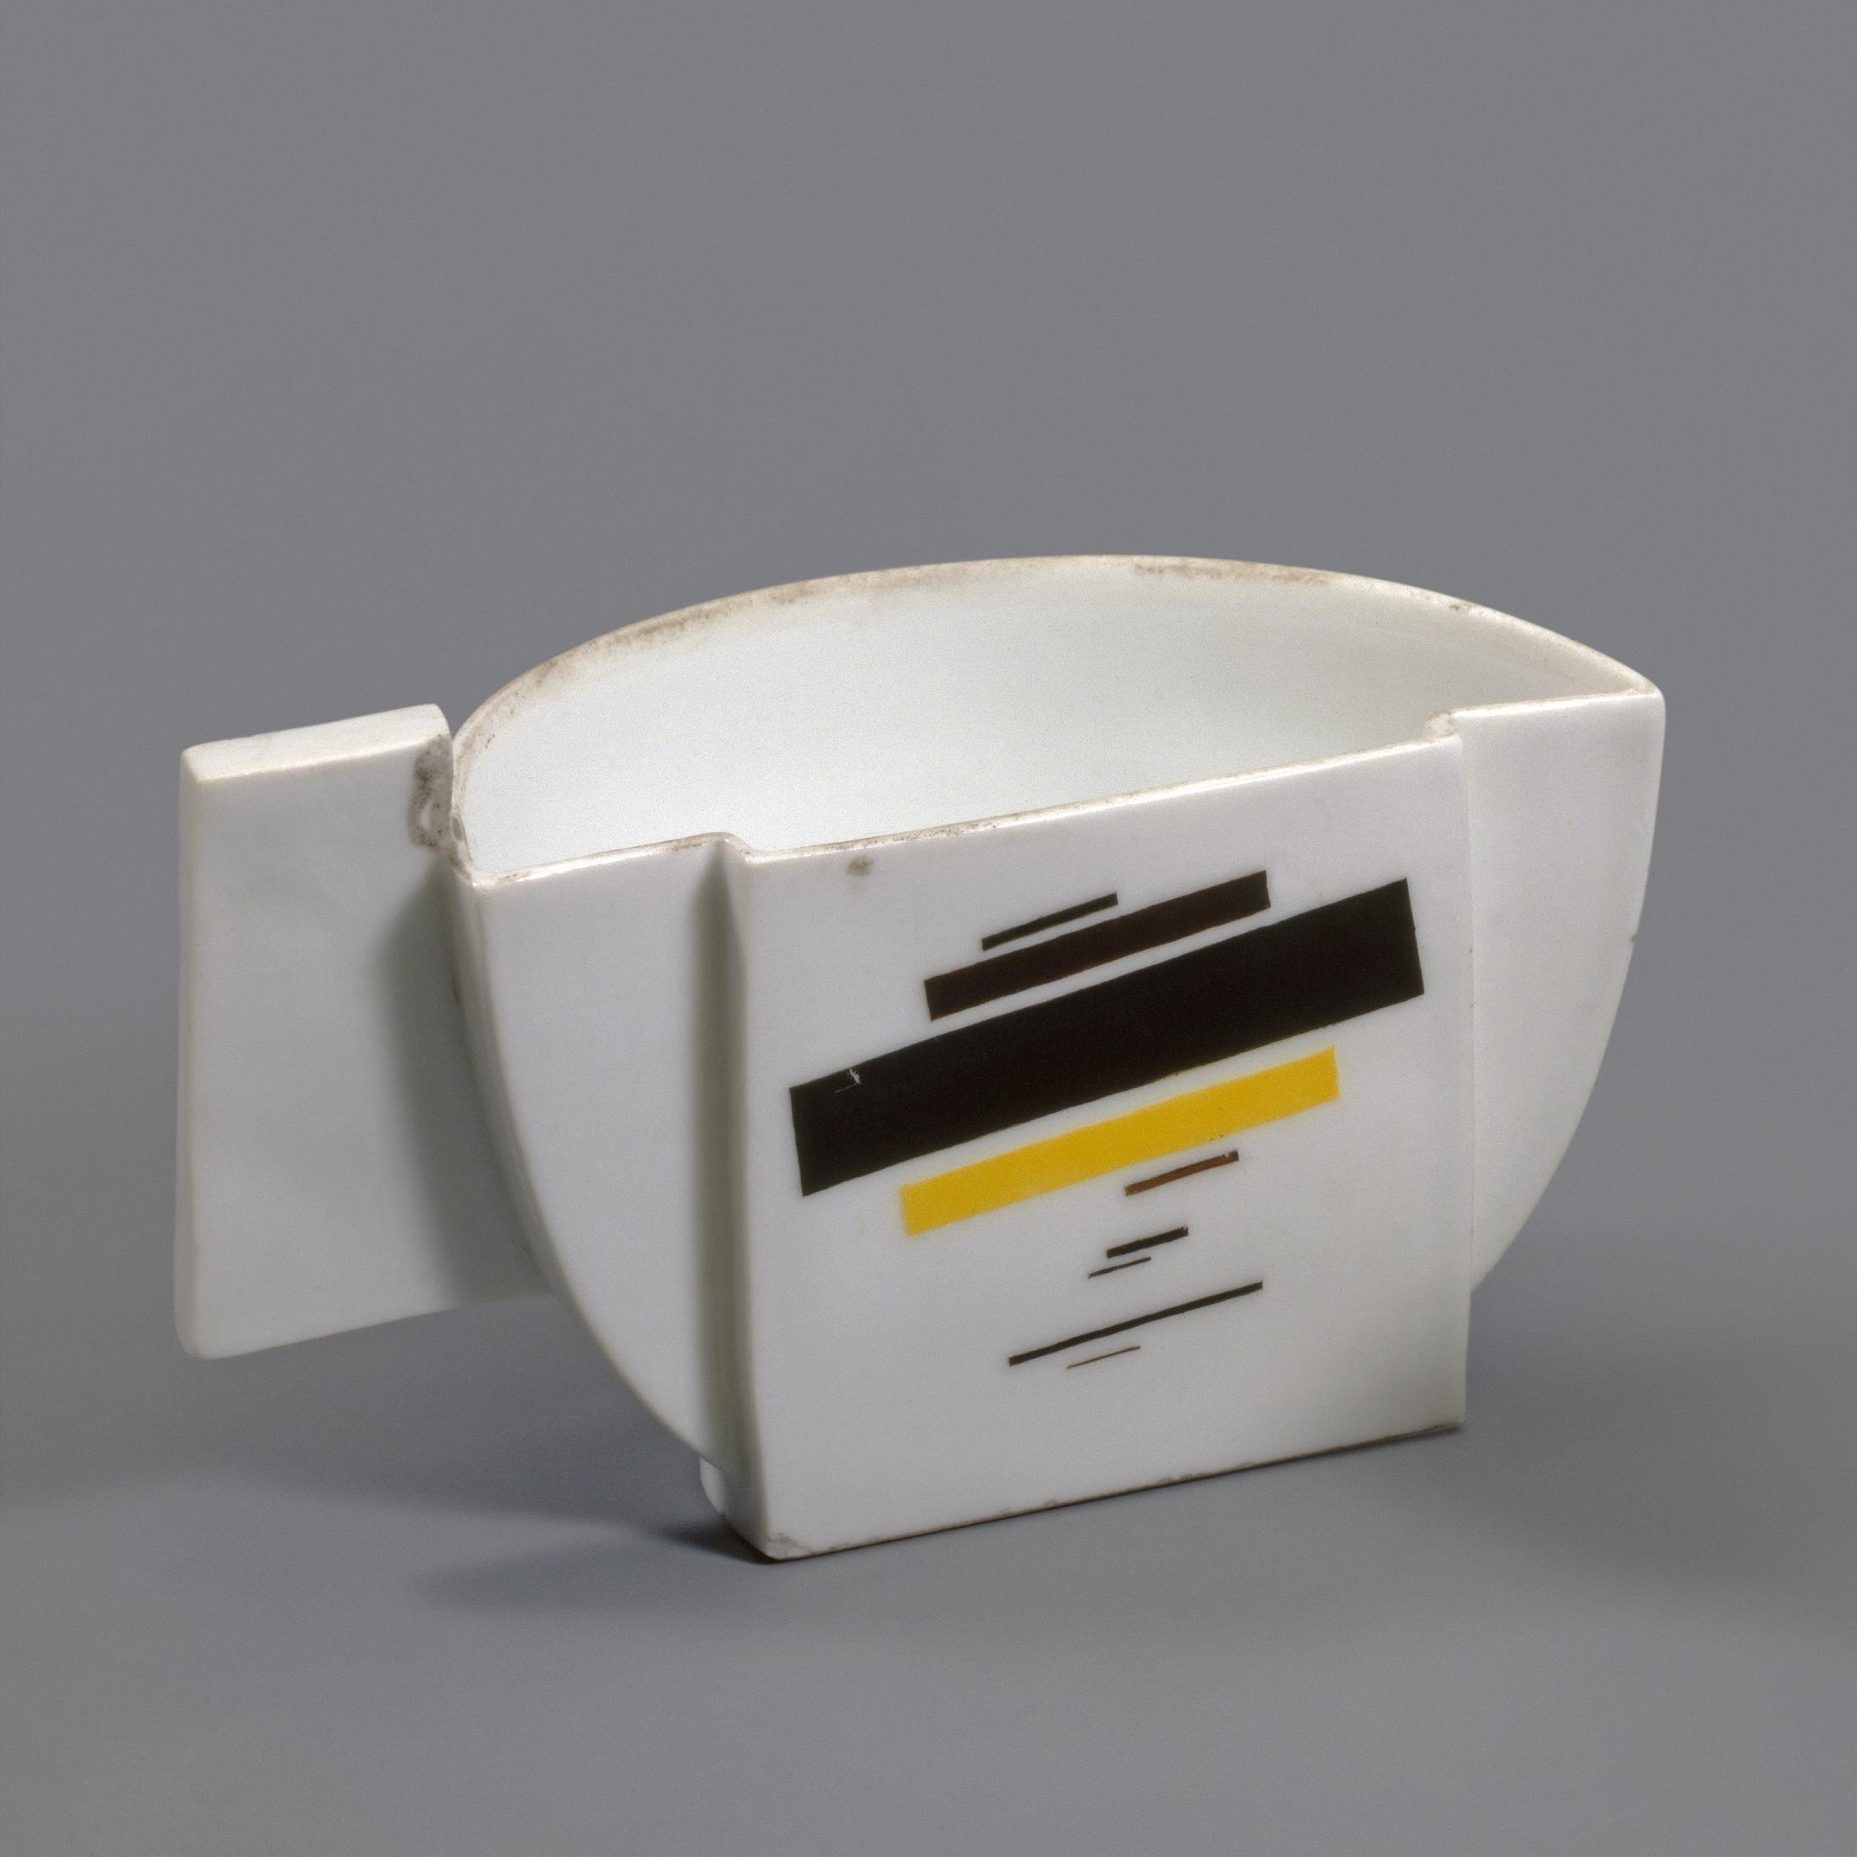 Soviet porcelain suprematism half cup by Malevich and Suetin. 1923. State Porcelain Factory, St Petersburg